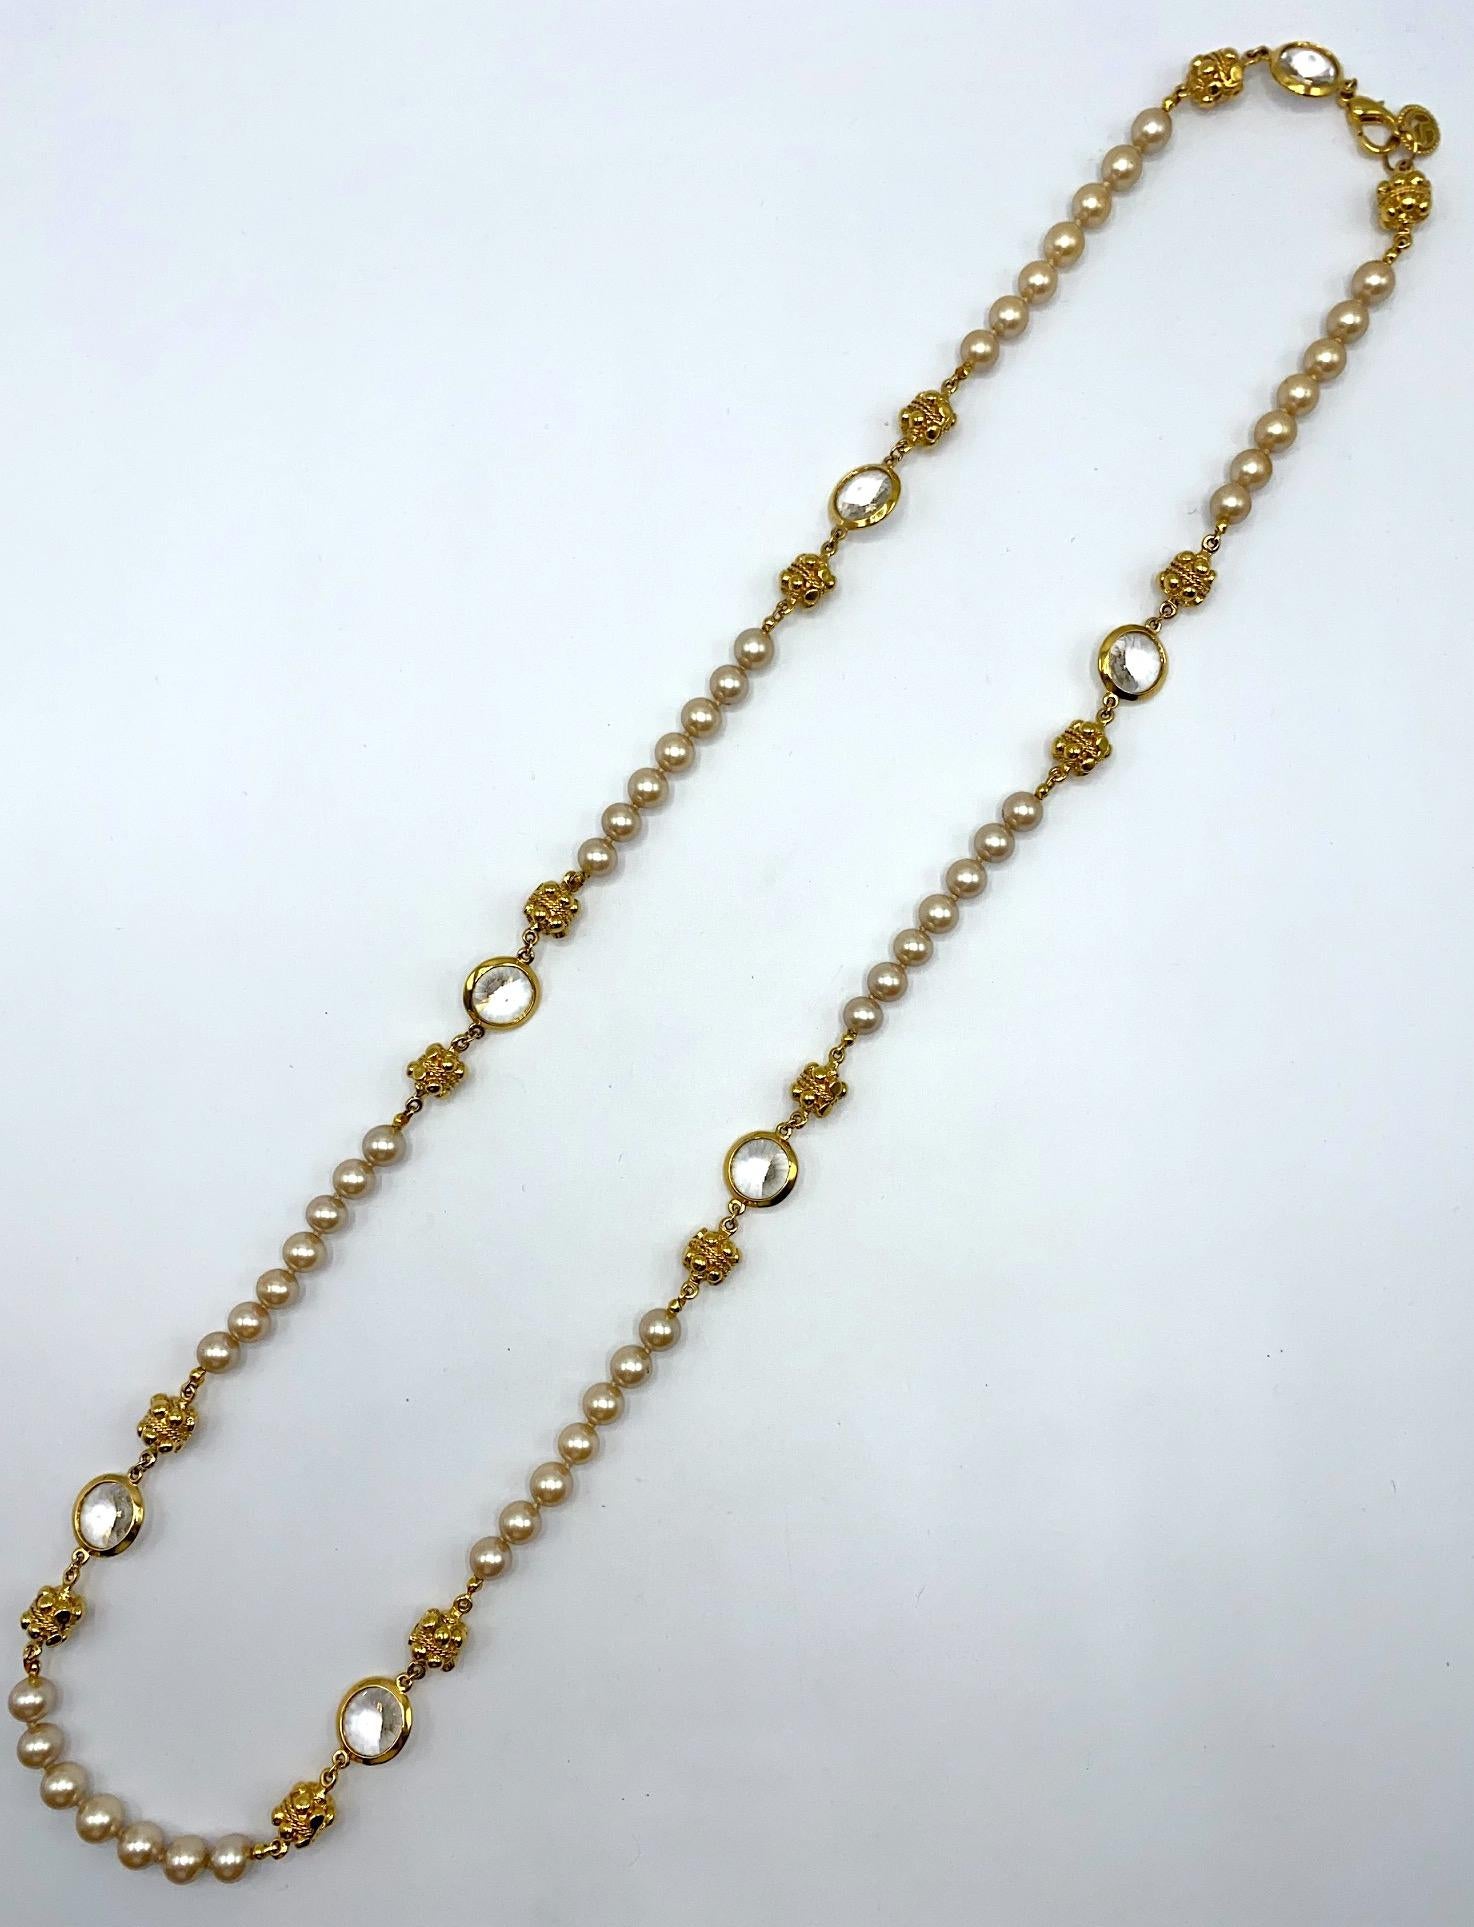 A very finely made and elegant St. John Collection long necklace in gold plate, faux pearls and crystals from the 1990s. Each 10 mm size glass center faux pearl is individually knotted in strands of 7 pearls that alternate with two fancy cast gold 